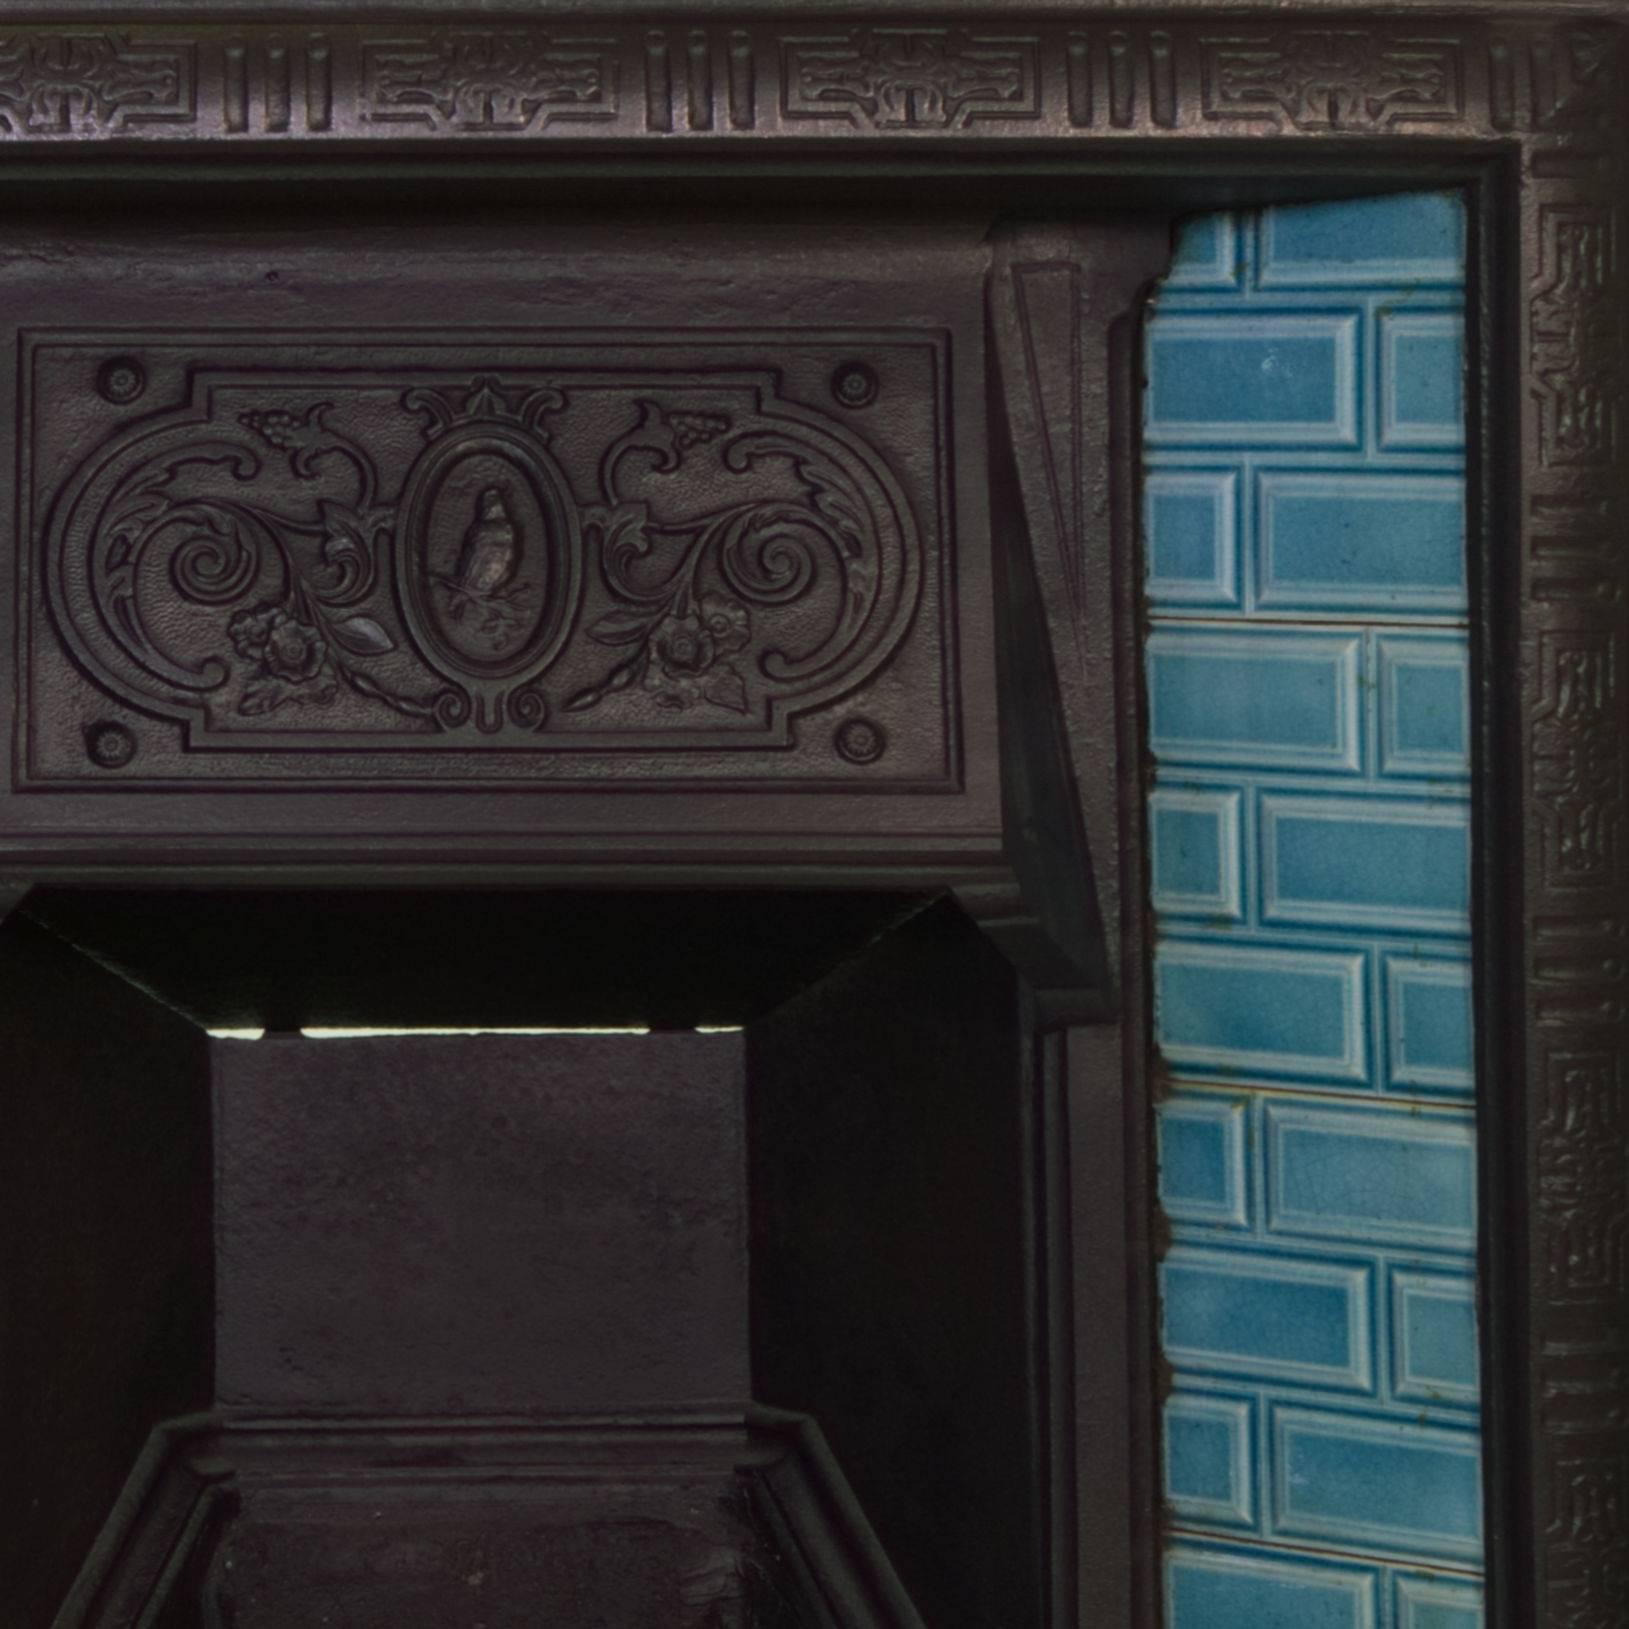 A rare 19th century English Victorian cast-iron tiled fireplace insert.
Blackened iron with original light turquoise tiles.
Beautifully detailed to the canopy and frame boarder.
Salvaged from a London Town house.

Measure: Width 32